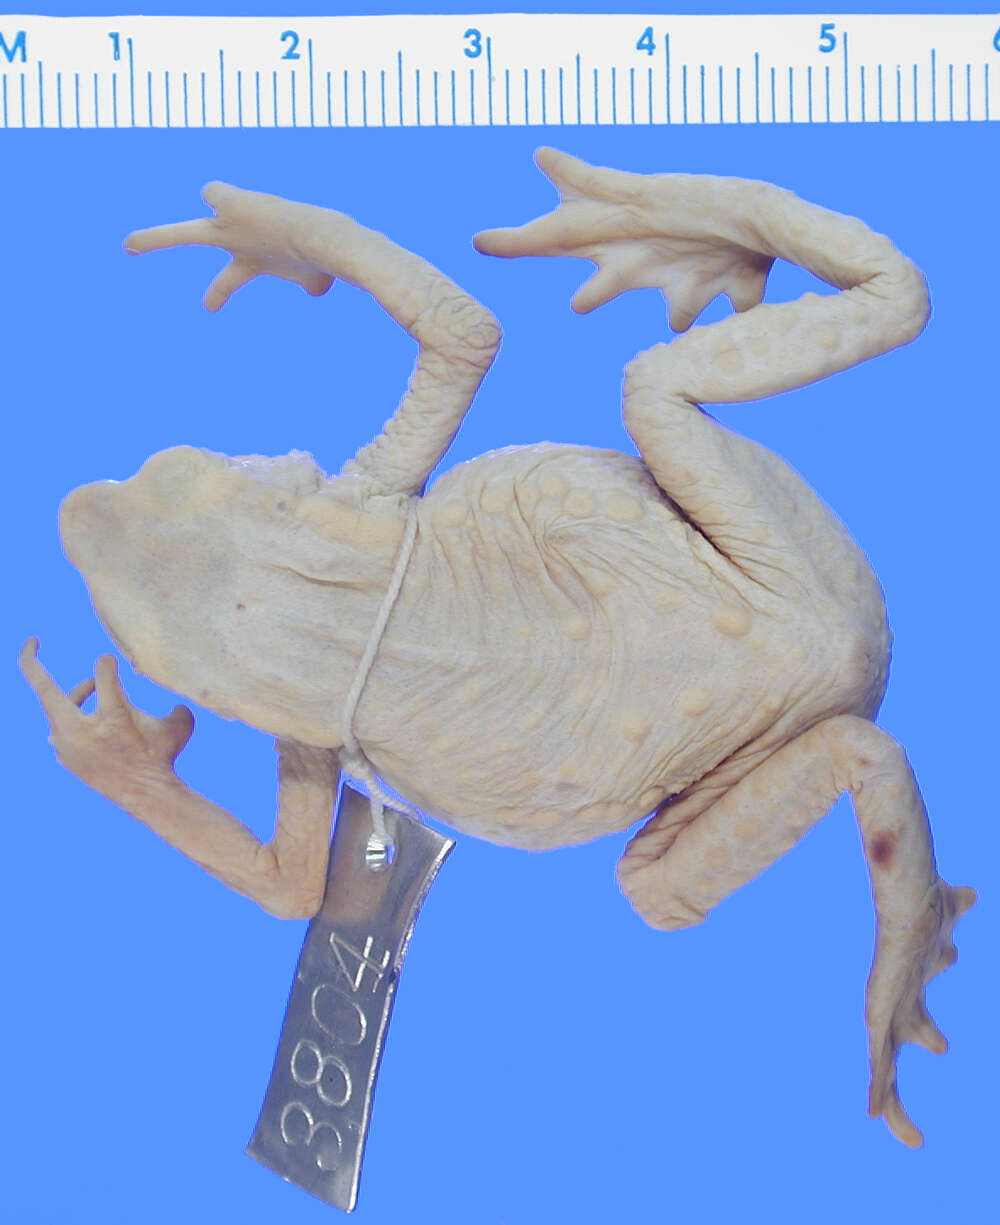 Image of "Red-nosed, stub footed toad"